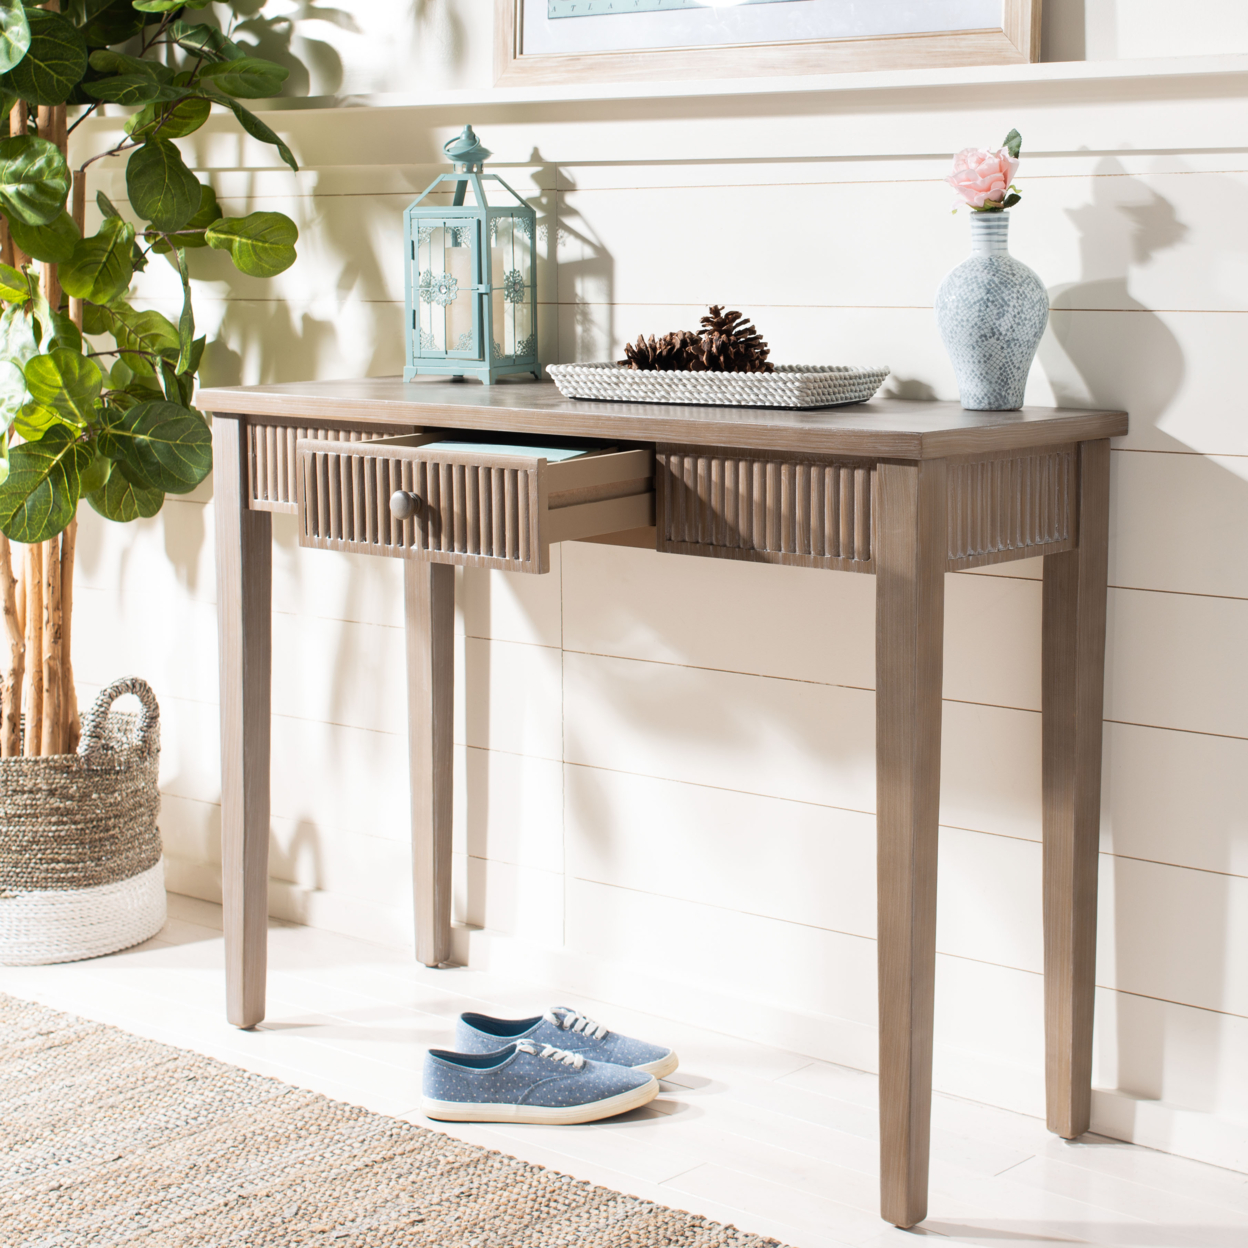 SAFAVIEH Beale Console Table With Storage Drawer Grey